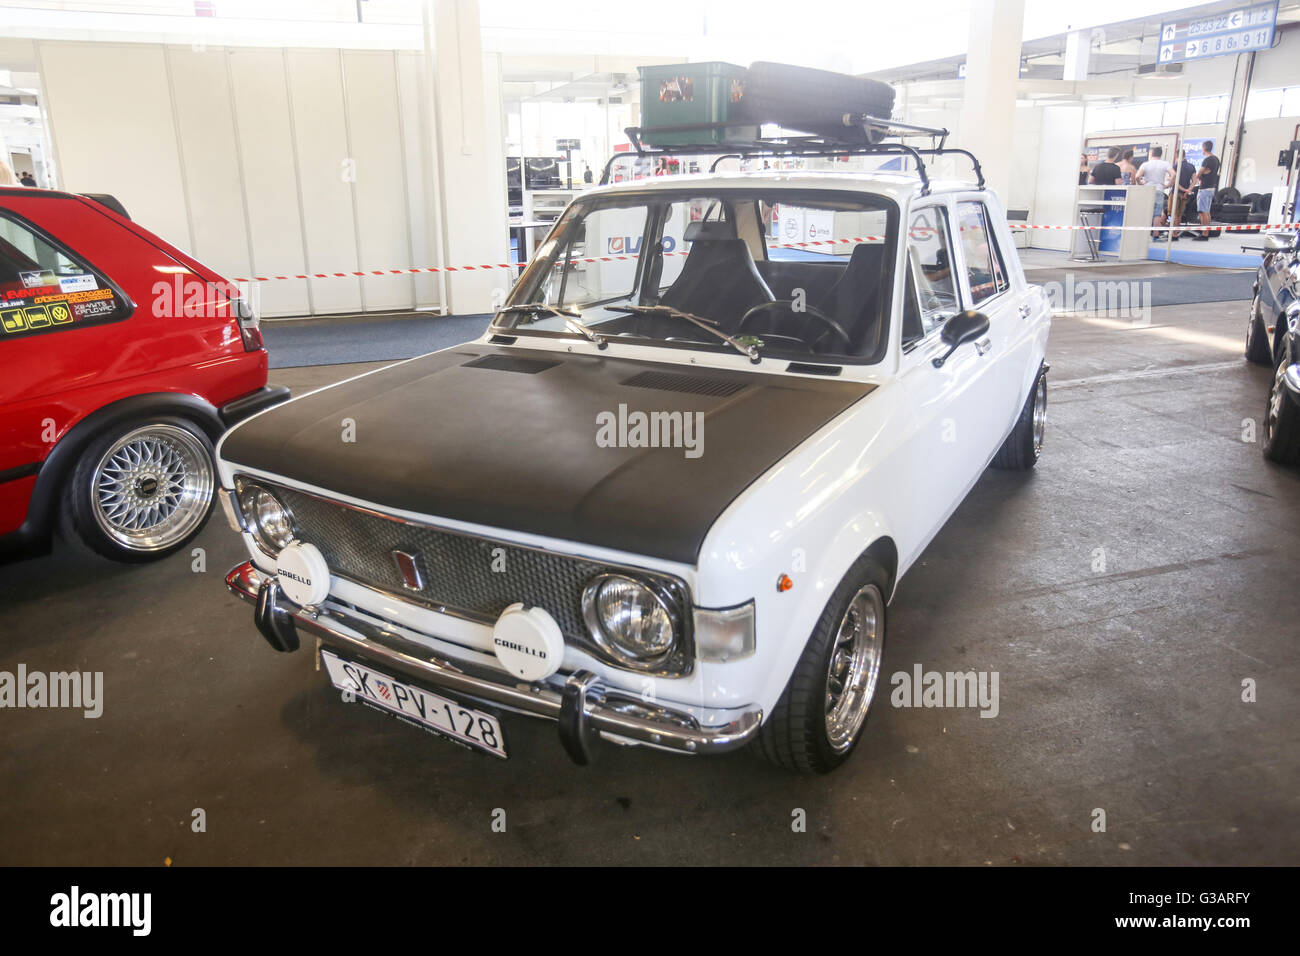 A Zastava 101 oldtimer automobile known by the nickname Stojadin, exhibited at Fast and furious street race in Zagreb, Croatia. Stock Photo